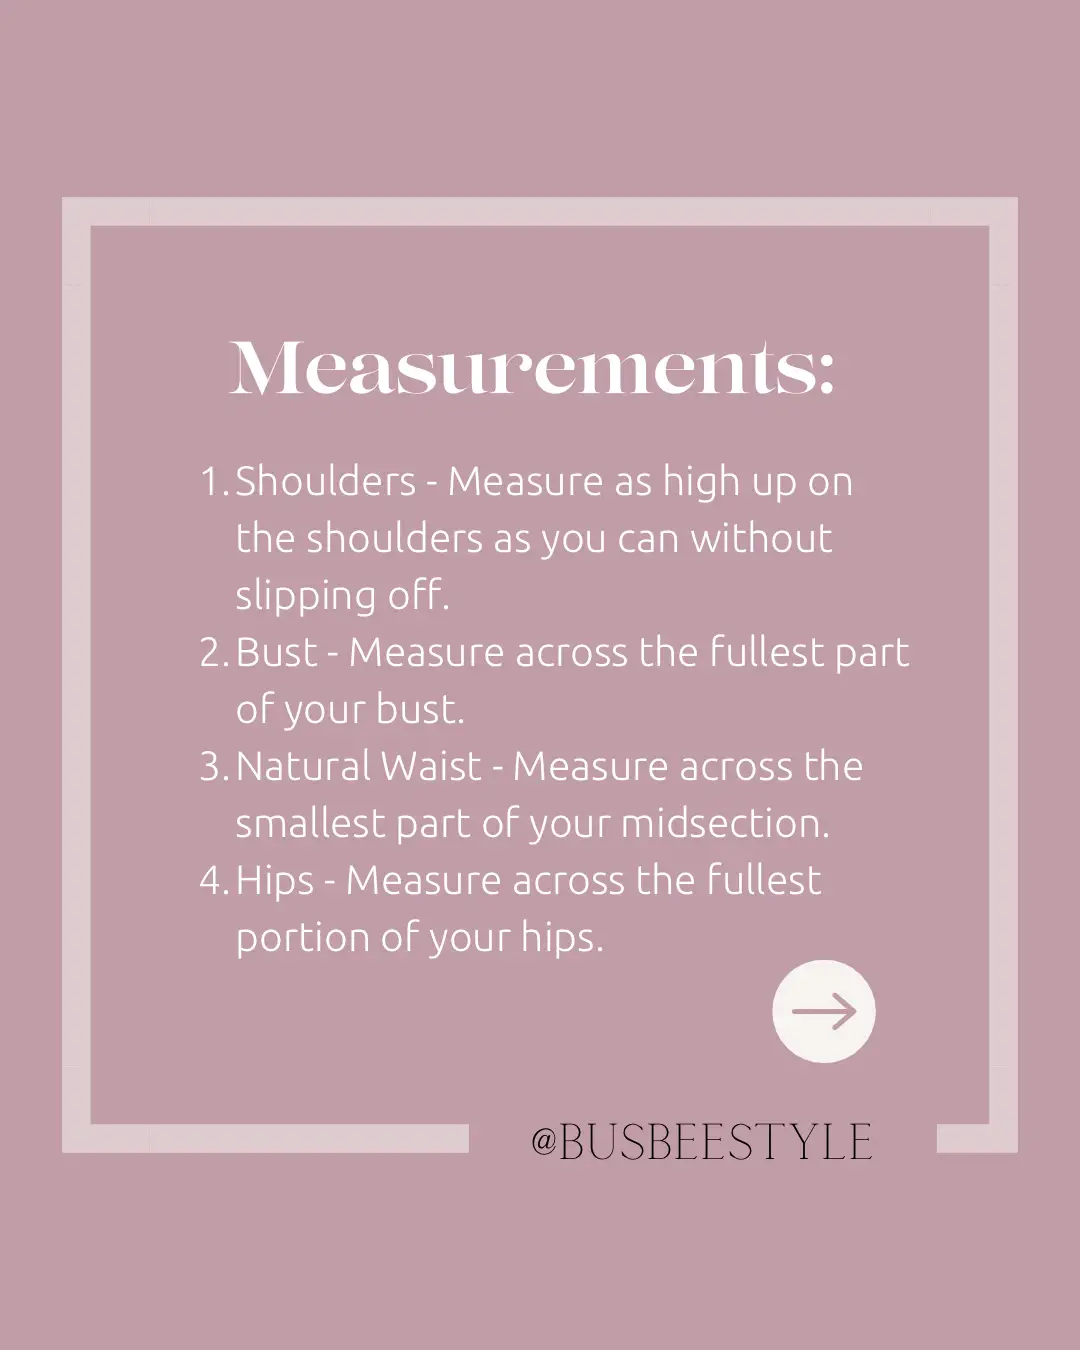 Guide] 32E: The shallowest to the most projected cups. Full guide/list in  the Bra Data by Size section. Bigger guide this time as there were loads  of measurements (thank you all!) added